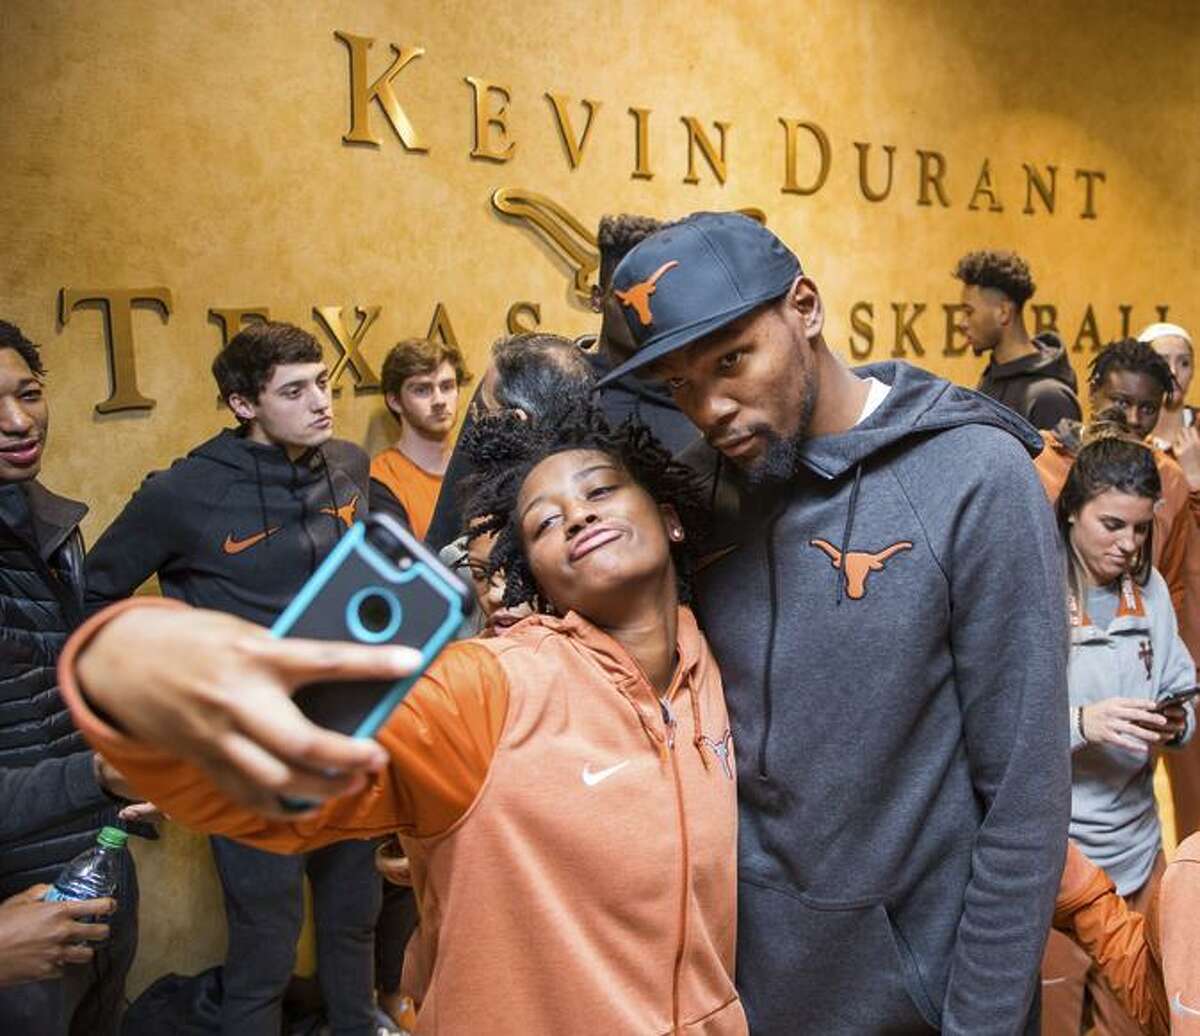 University of Texas women's basketball player Jordan Hosey poses for a selfie with Kevin Durant following the unveiling of the Kevin Durant Texas Basketball Center on Friday, Jan. 5, 2018 in Austin, Texas. The basketball facilities have received numerous upgrades and renovations in the past year and there are more to come with help from another $3 million donated by Durant.